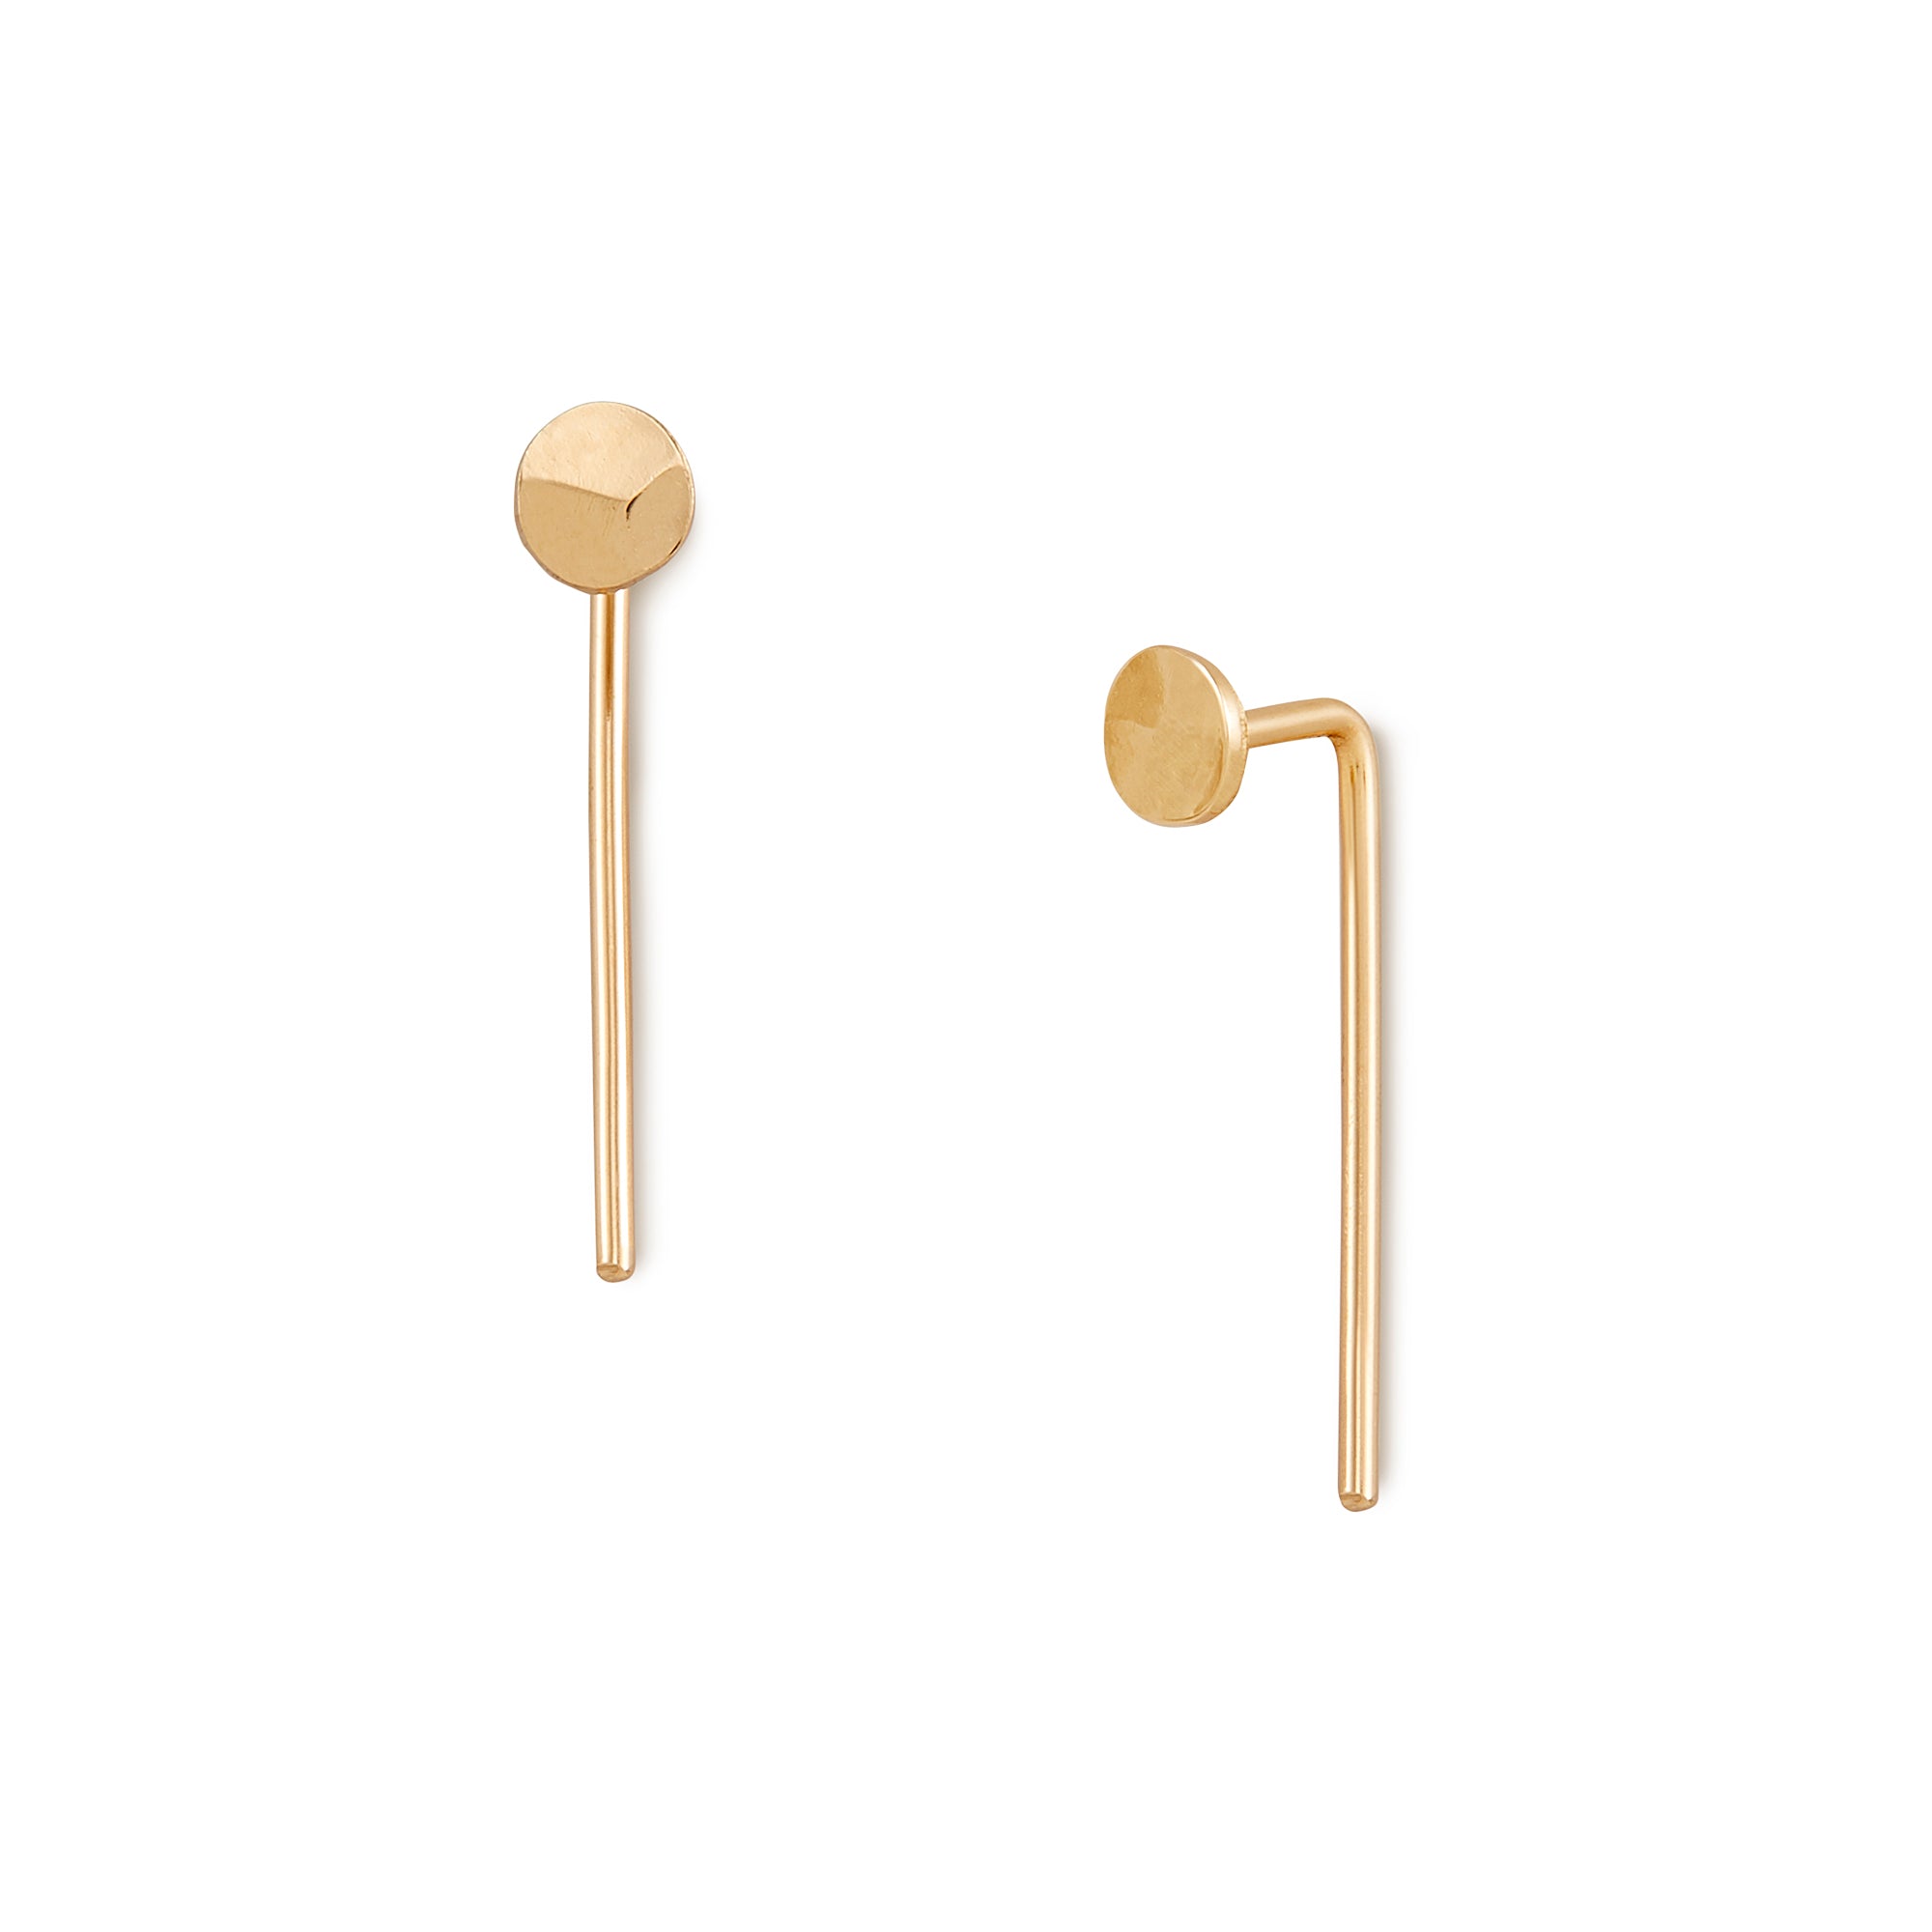 The Dot Hook, modern simplicity in 14k gold with your choice of classic hammered textured or nugget texture